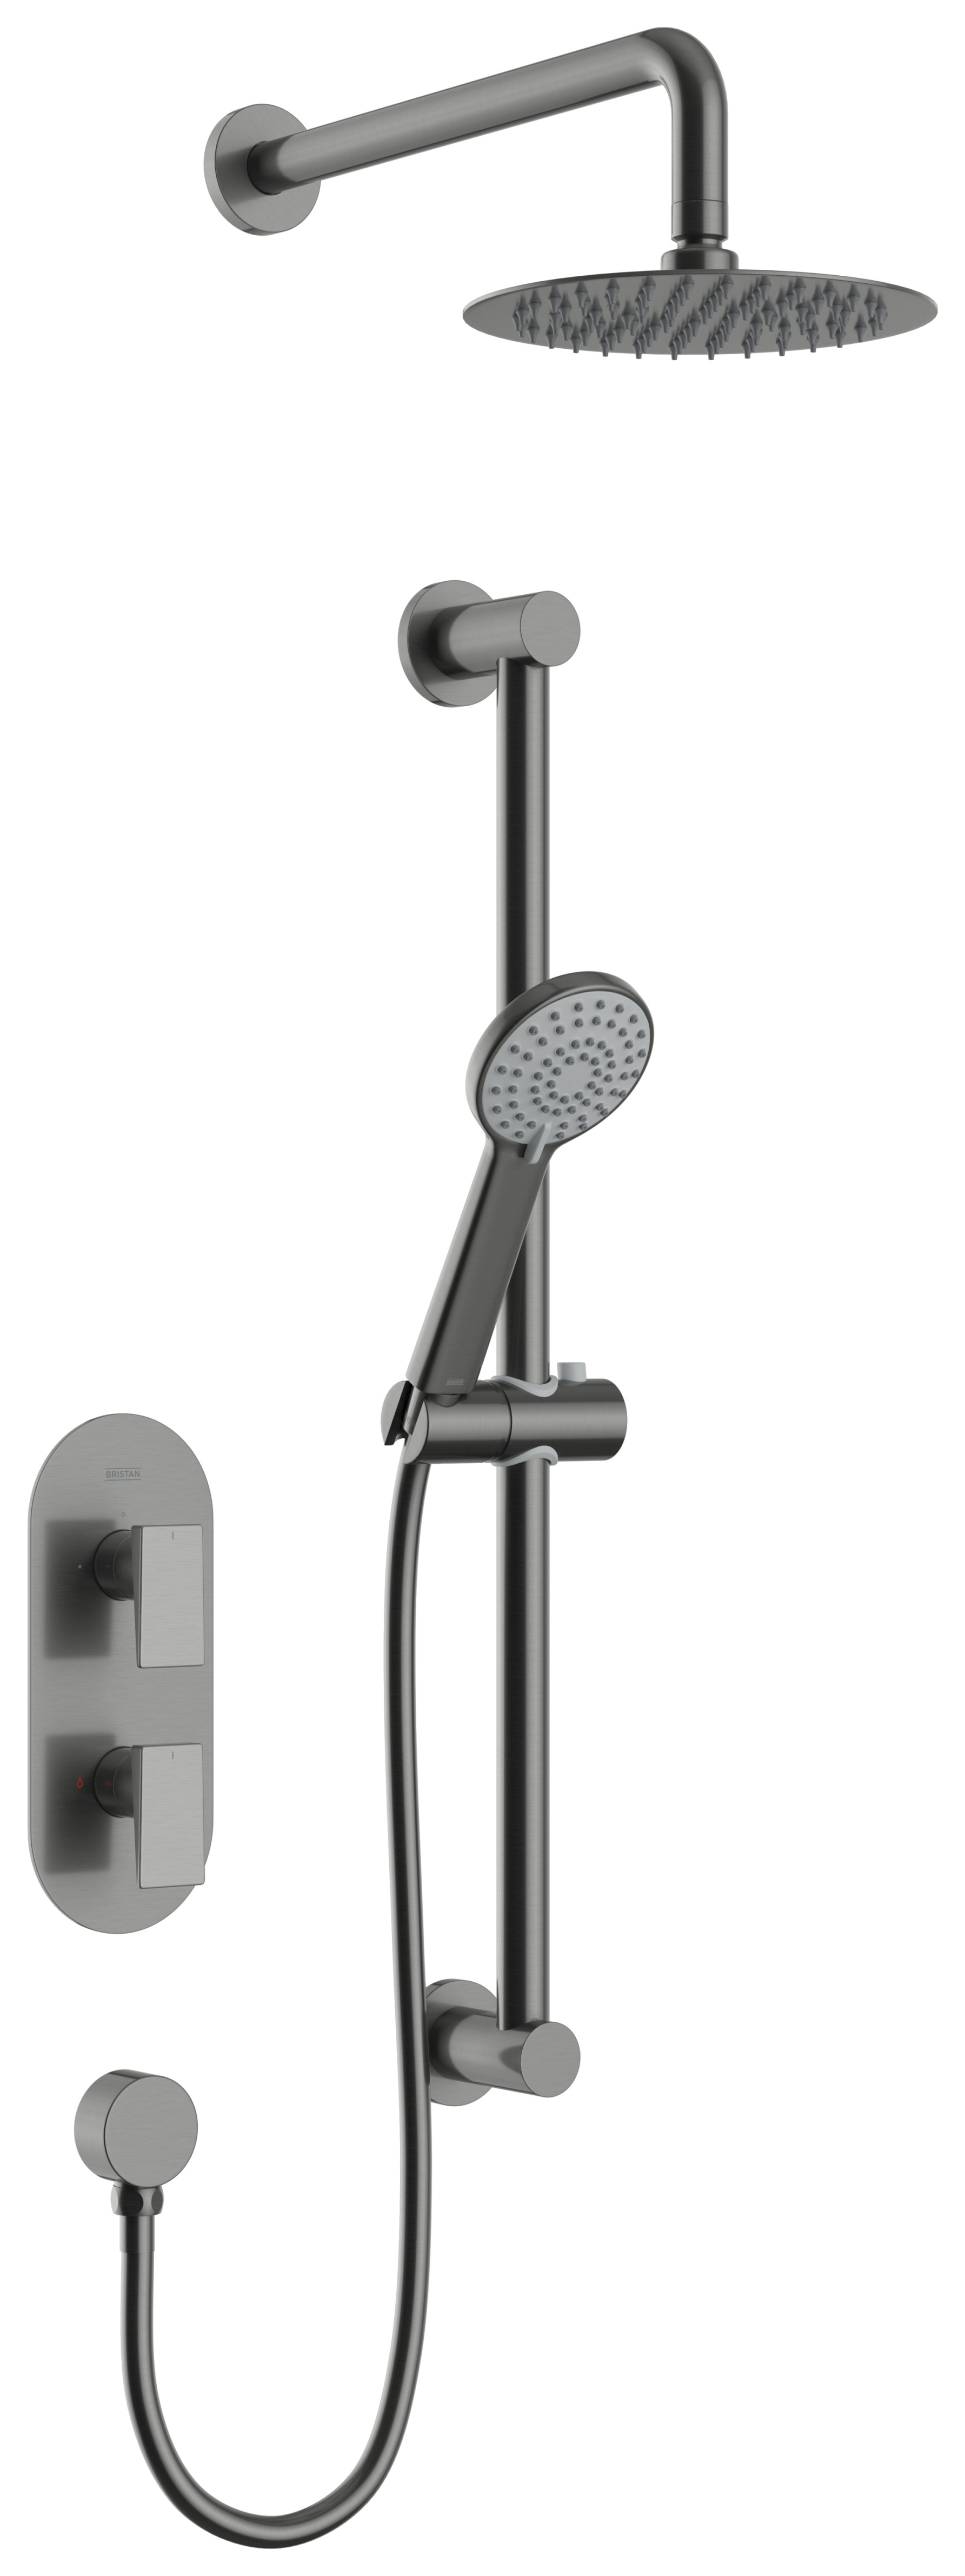 Bristan Frammento Recessed Dual Control Mixer Shower - Brushed Anthracite